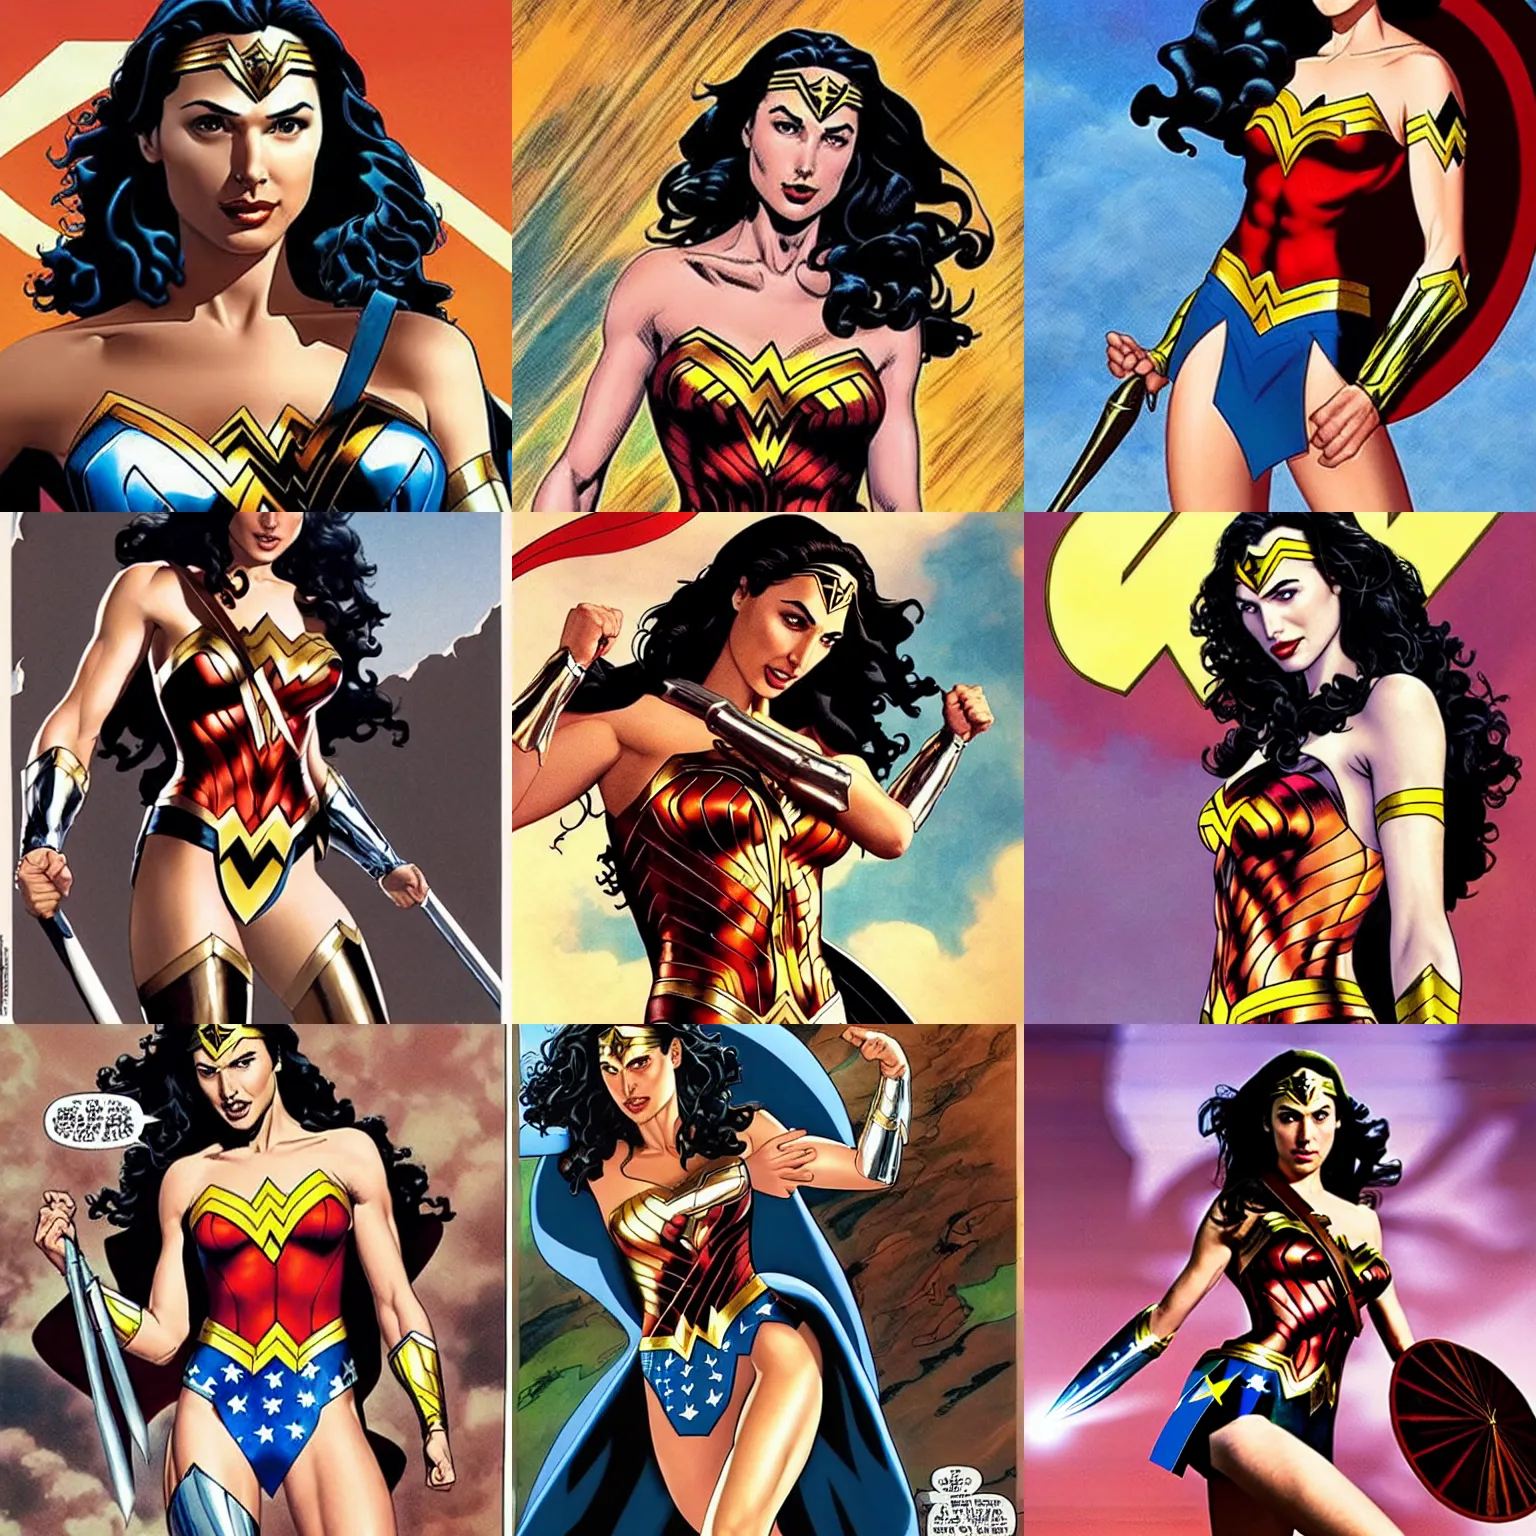 Prompt: Gal Gadot as wonder woman by brian bolland by alex ross by Esad Ribic by Greg Land